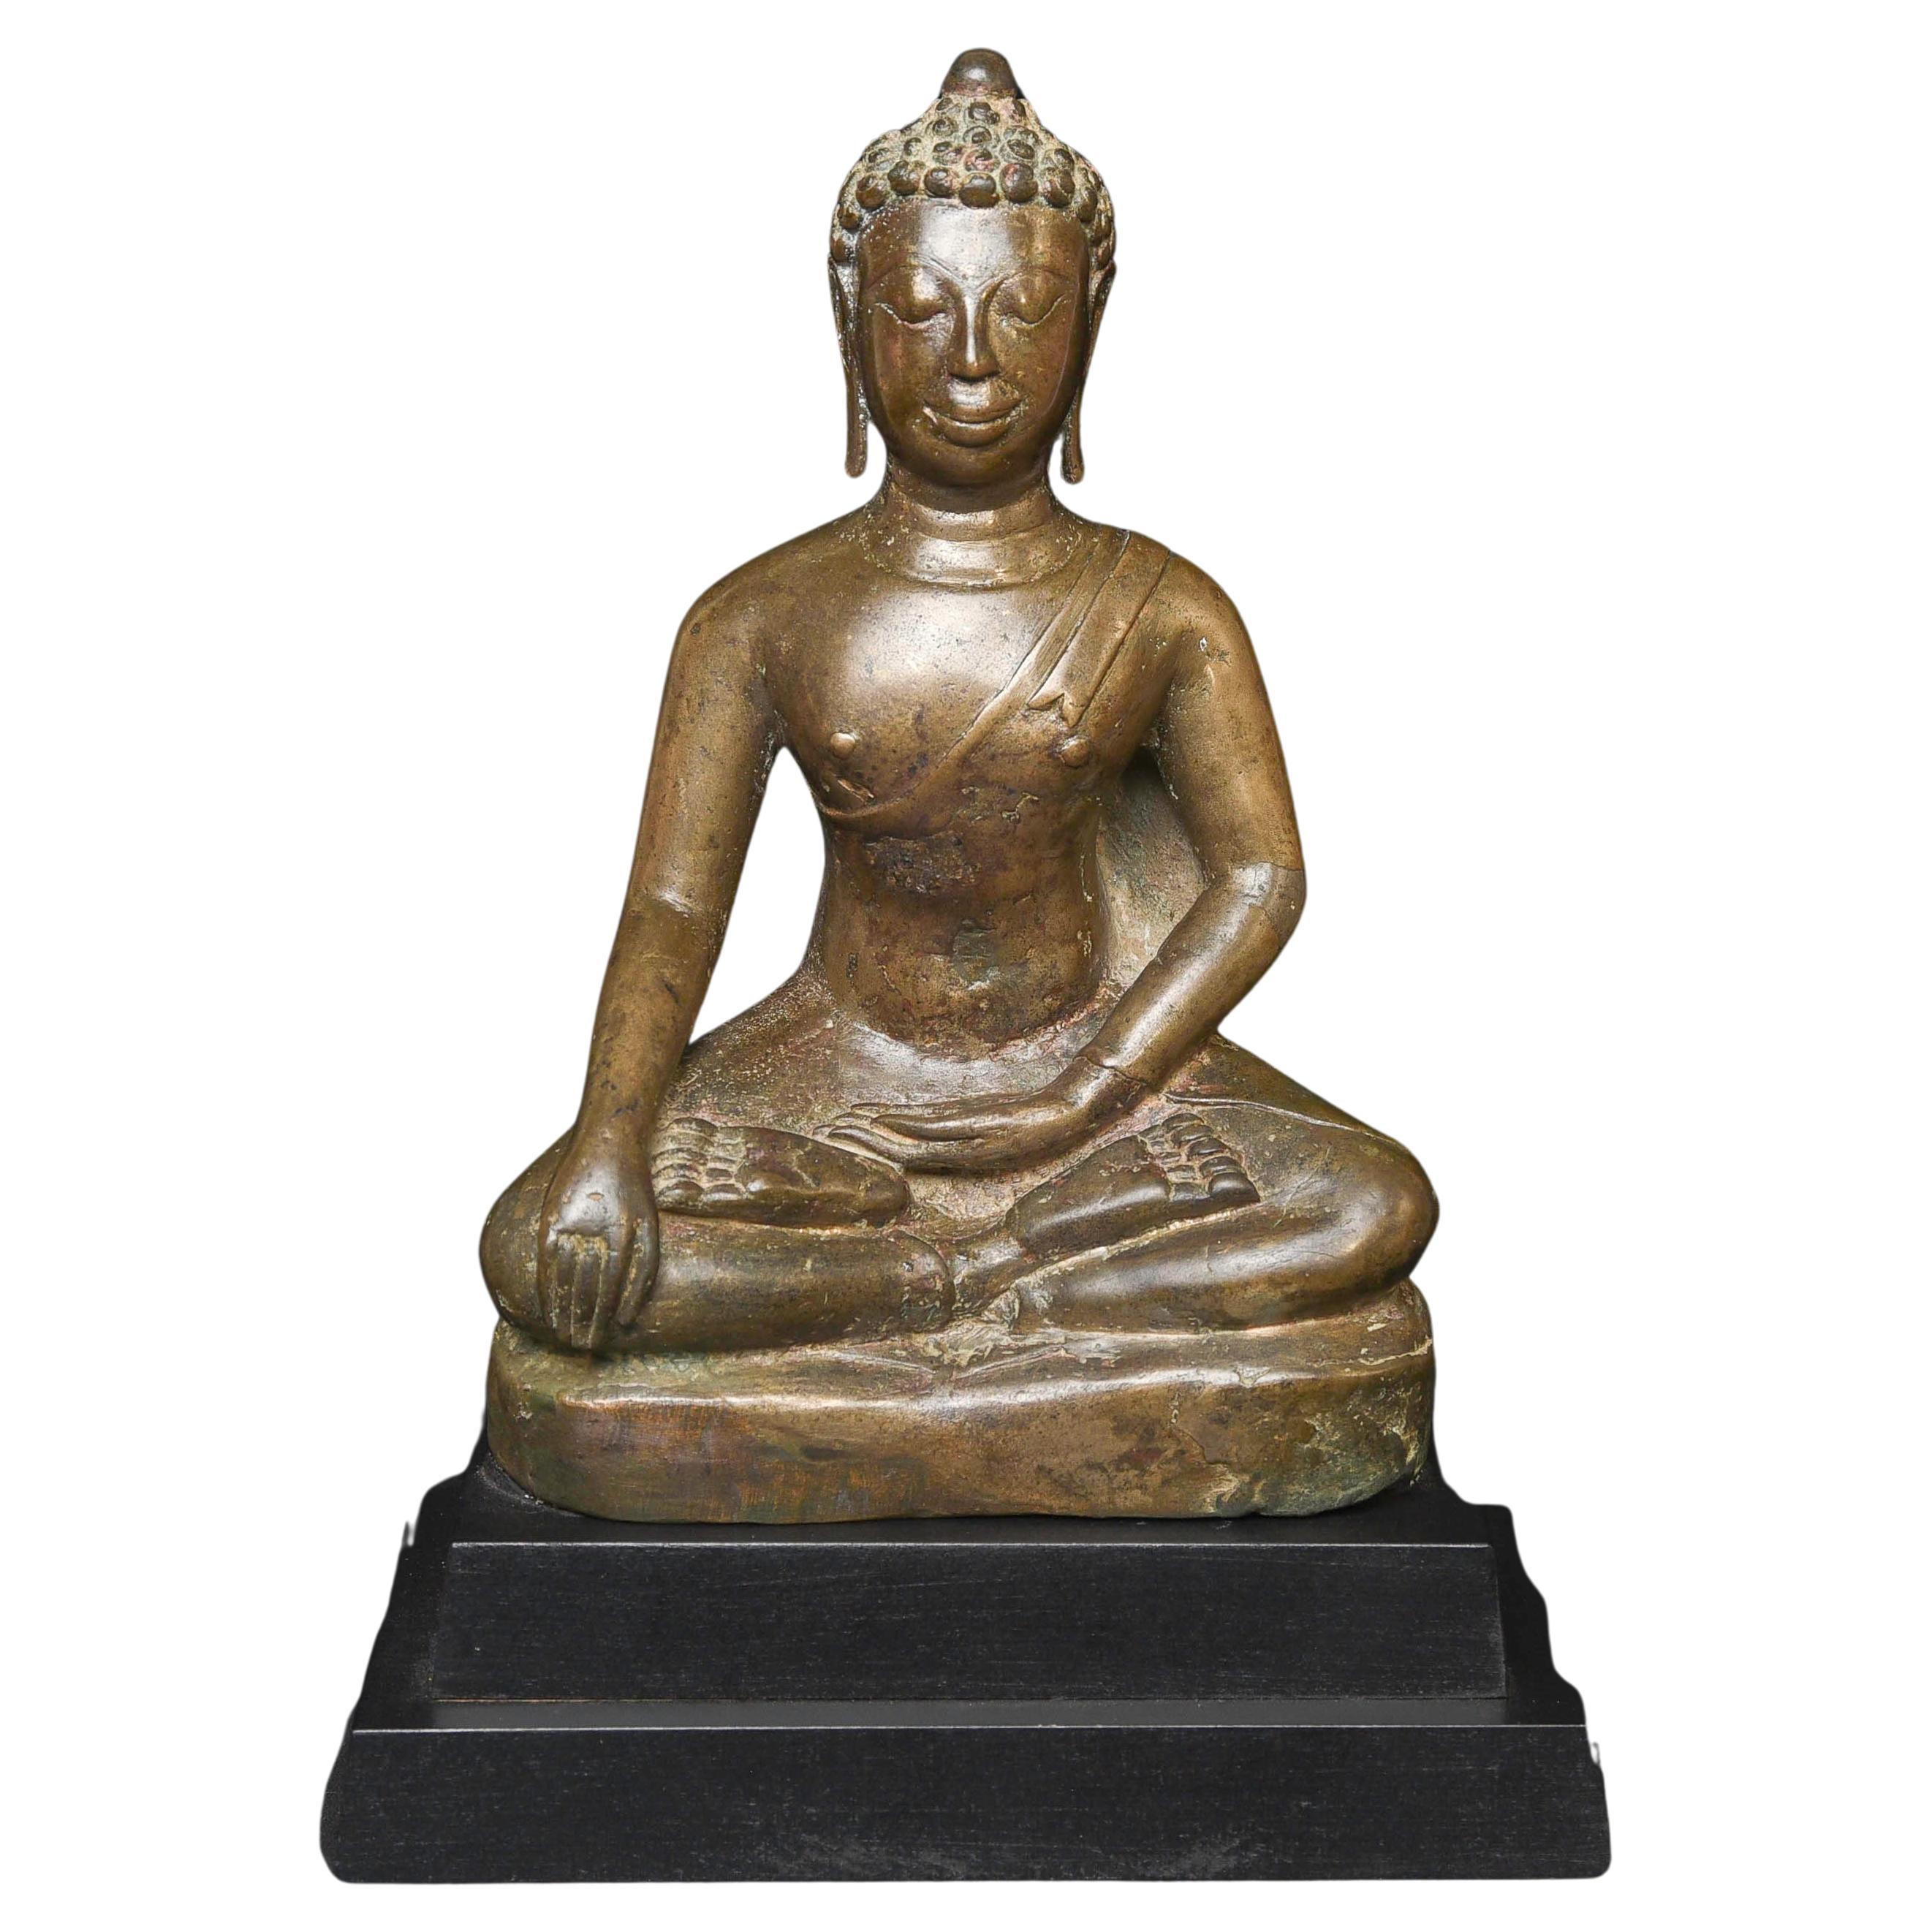  "Pre-Sukhothai, as it is likely 10/11thC For Sale